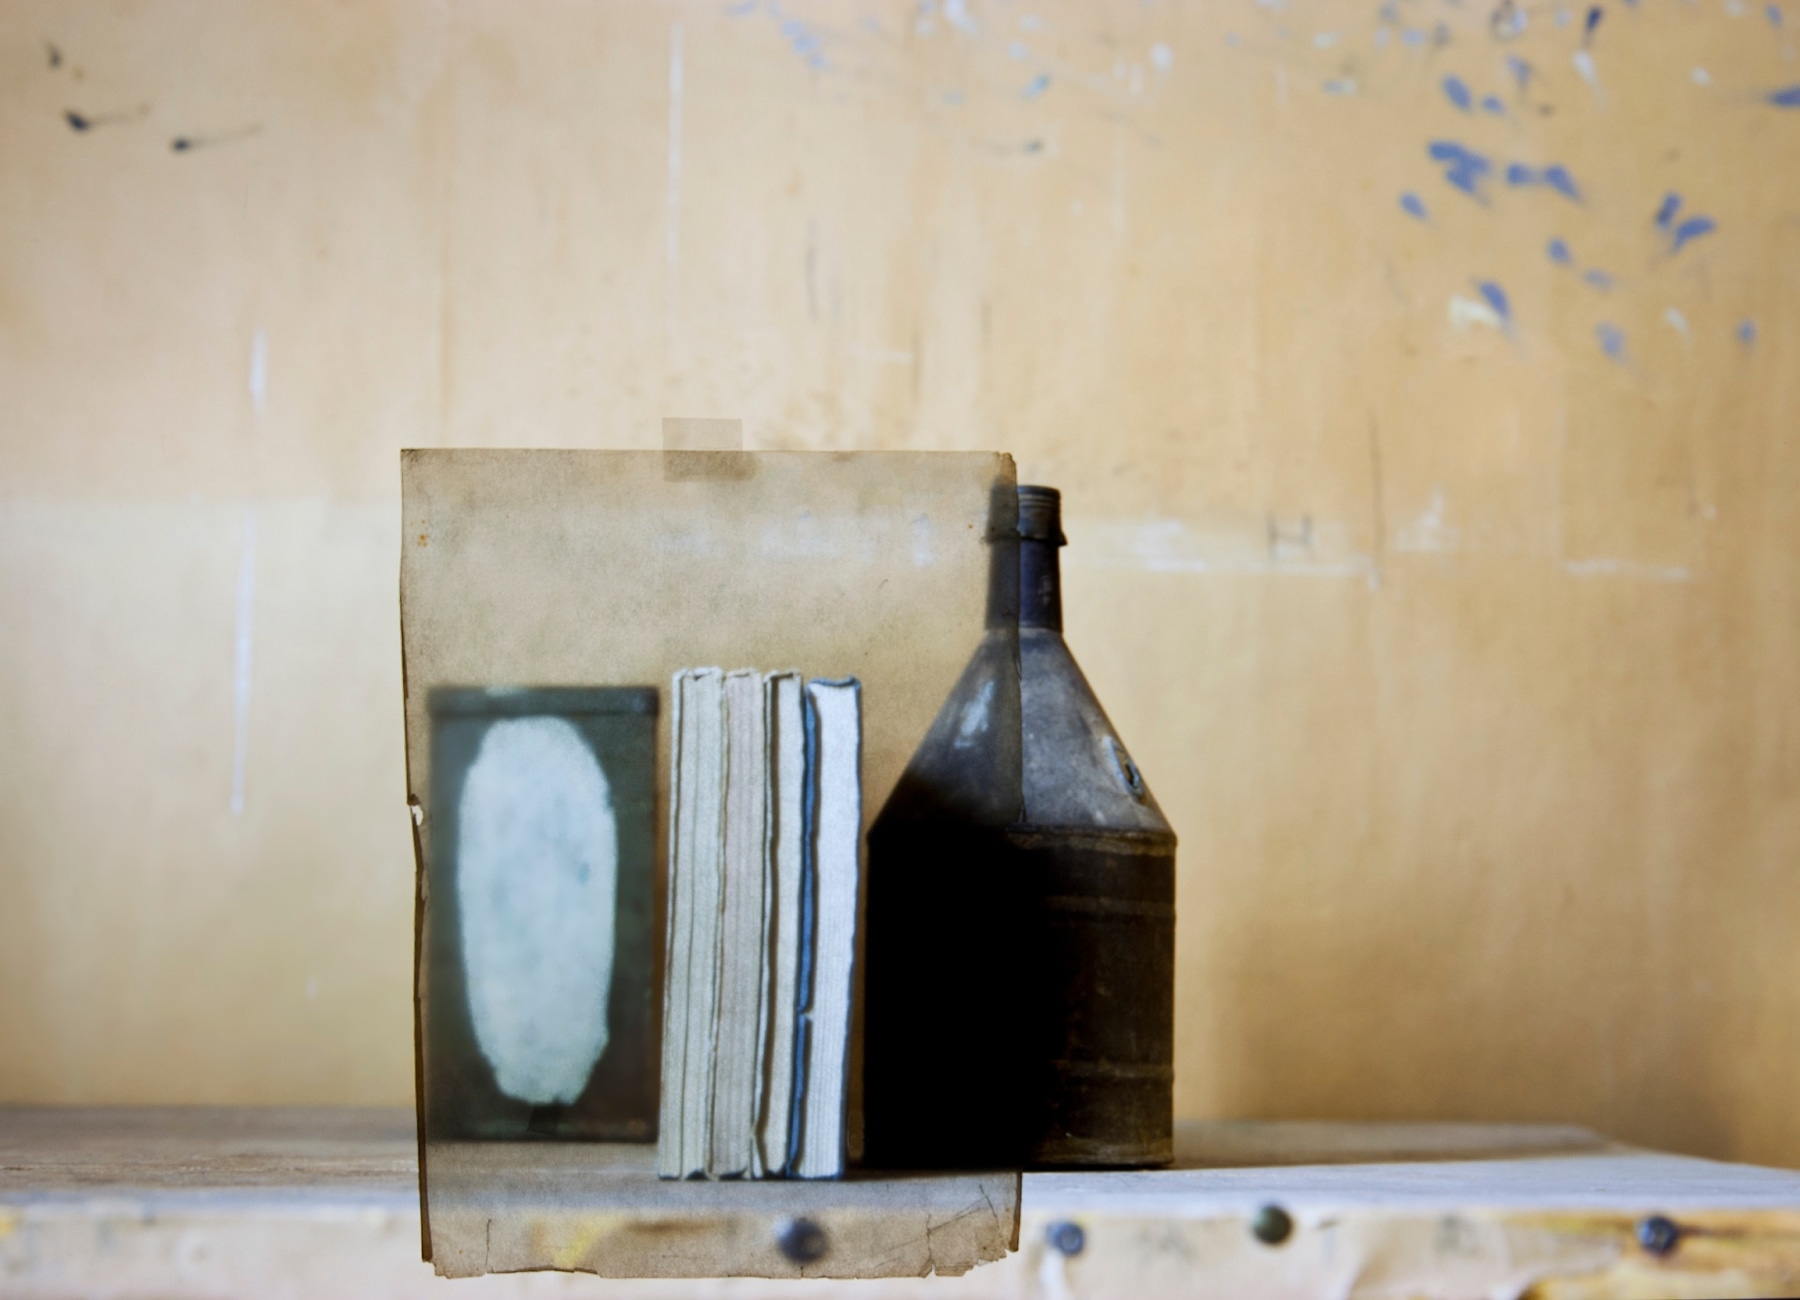 Mary Ellen Bartley,&nbsp;Oil Can Glassine, 2022, from the series Morandi&#039;s Books. Archival pigment print, 13 x 18 inches.